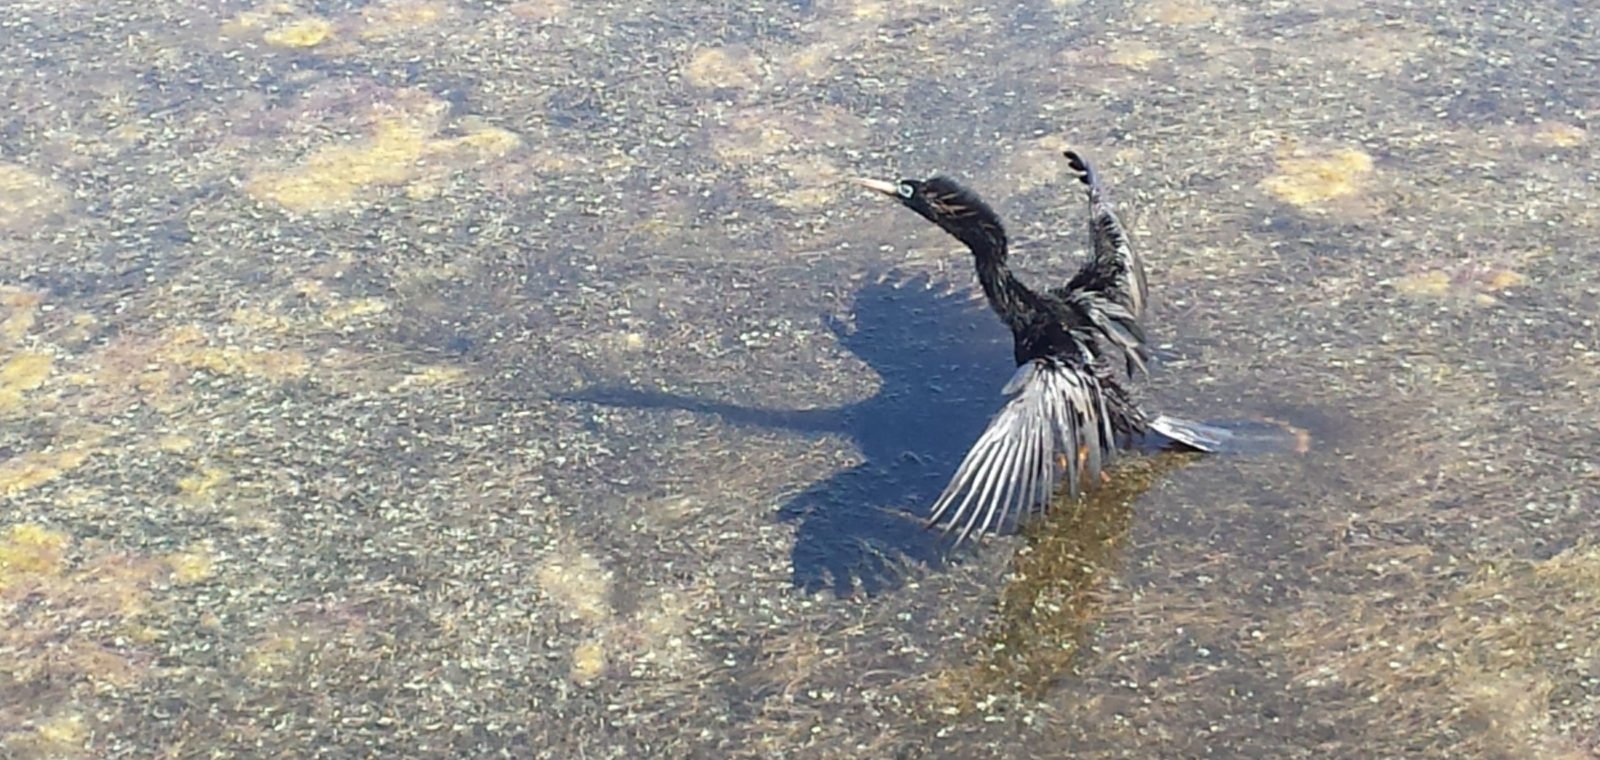 Cormorant with outspread wings drying in the sun